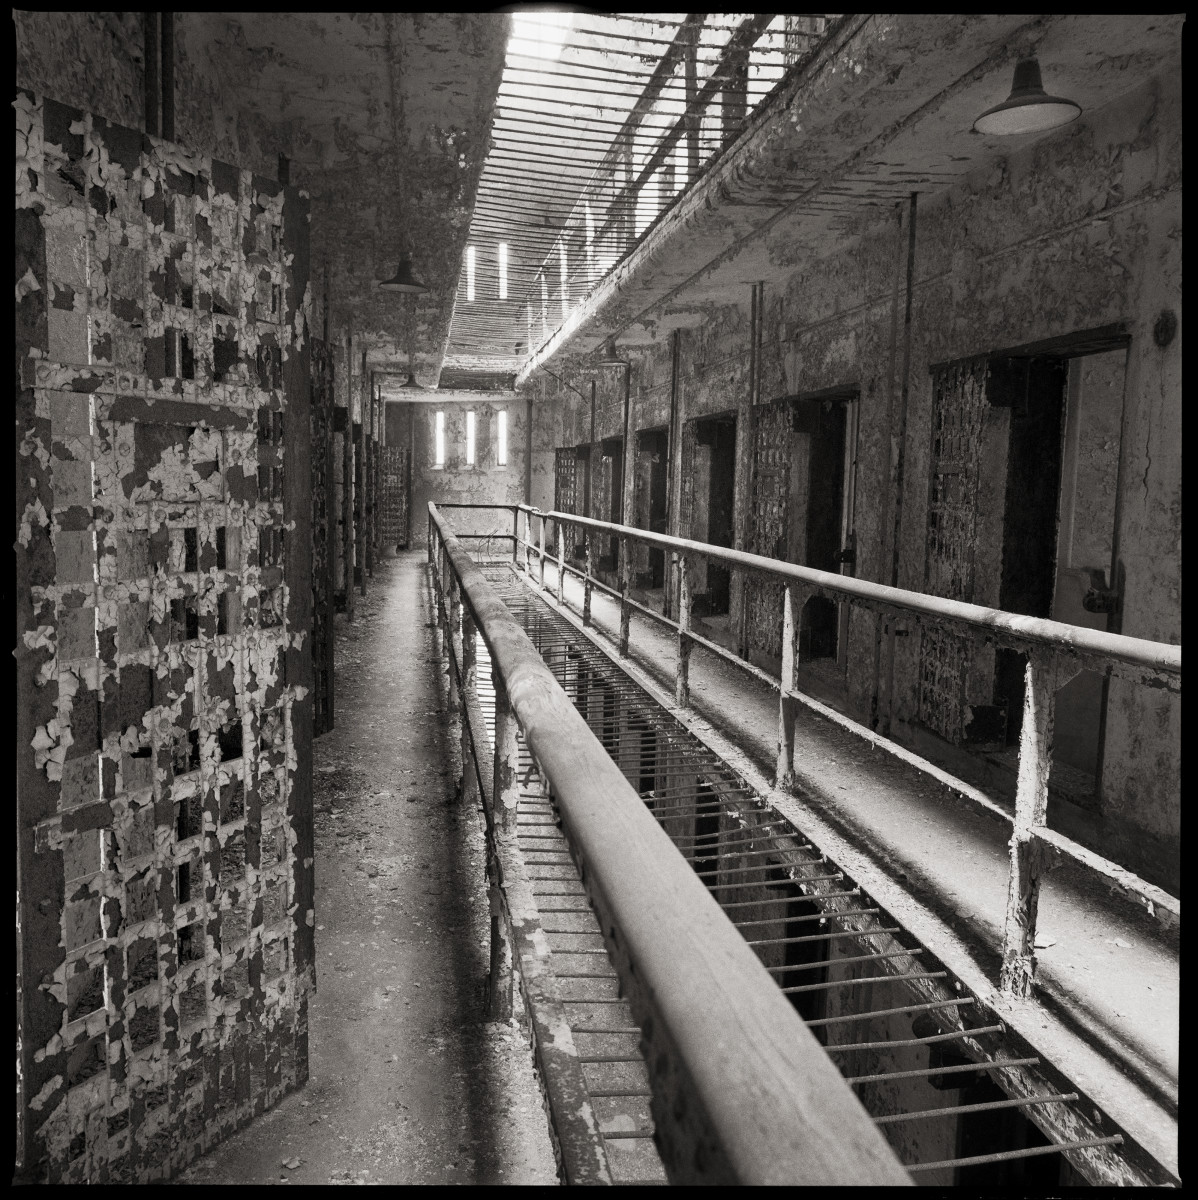 Cellblock #14 by Eric T. Kunsman  Image: ID: A black and white image shows a corridor of prison cells.  There is a hallway on either side of the open center with cells on both sides.  There is a window at the end of the corridor.